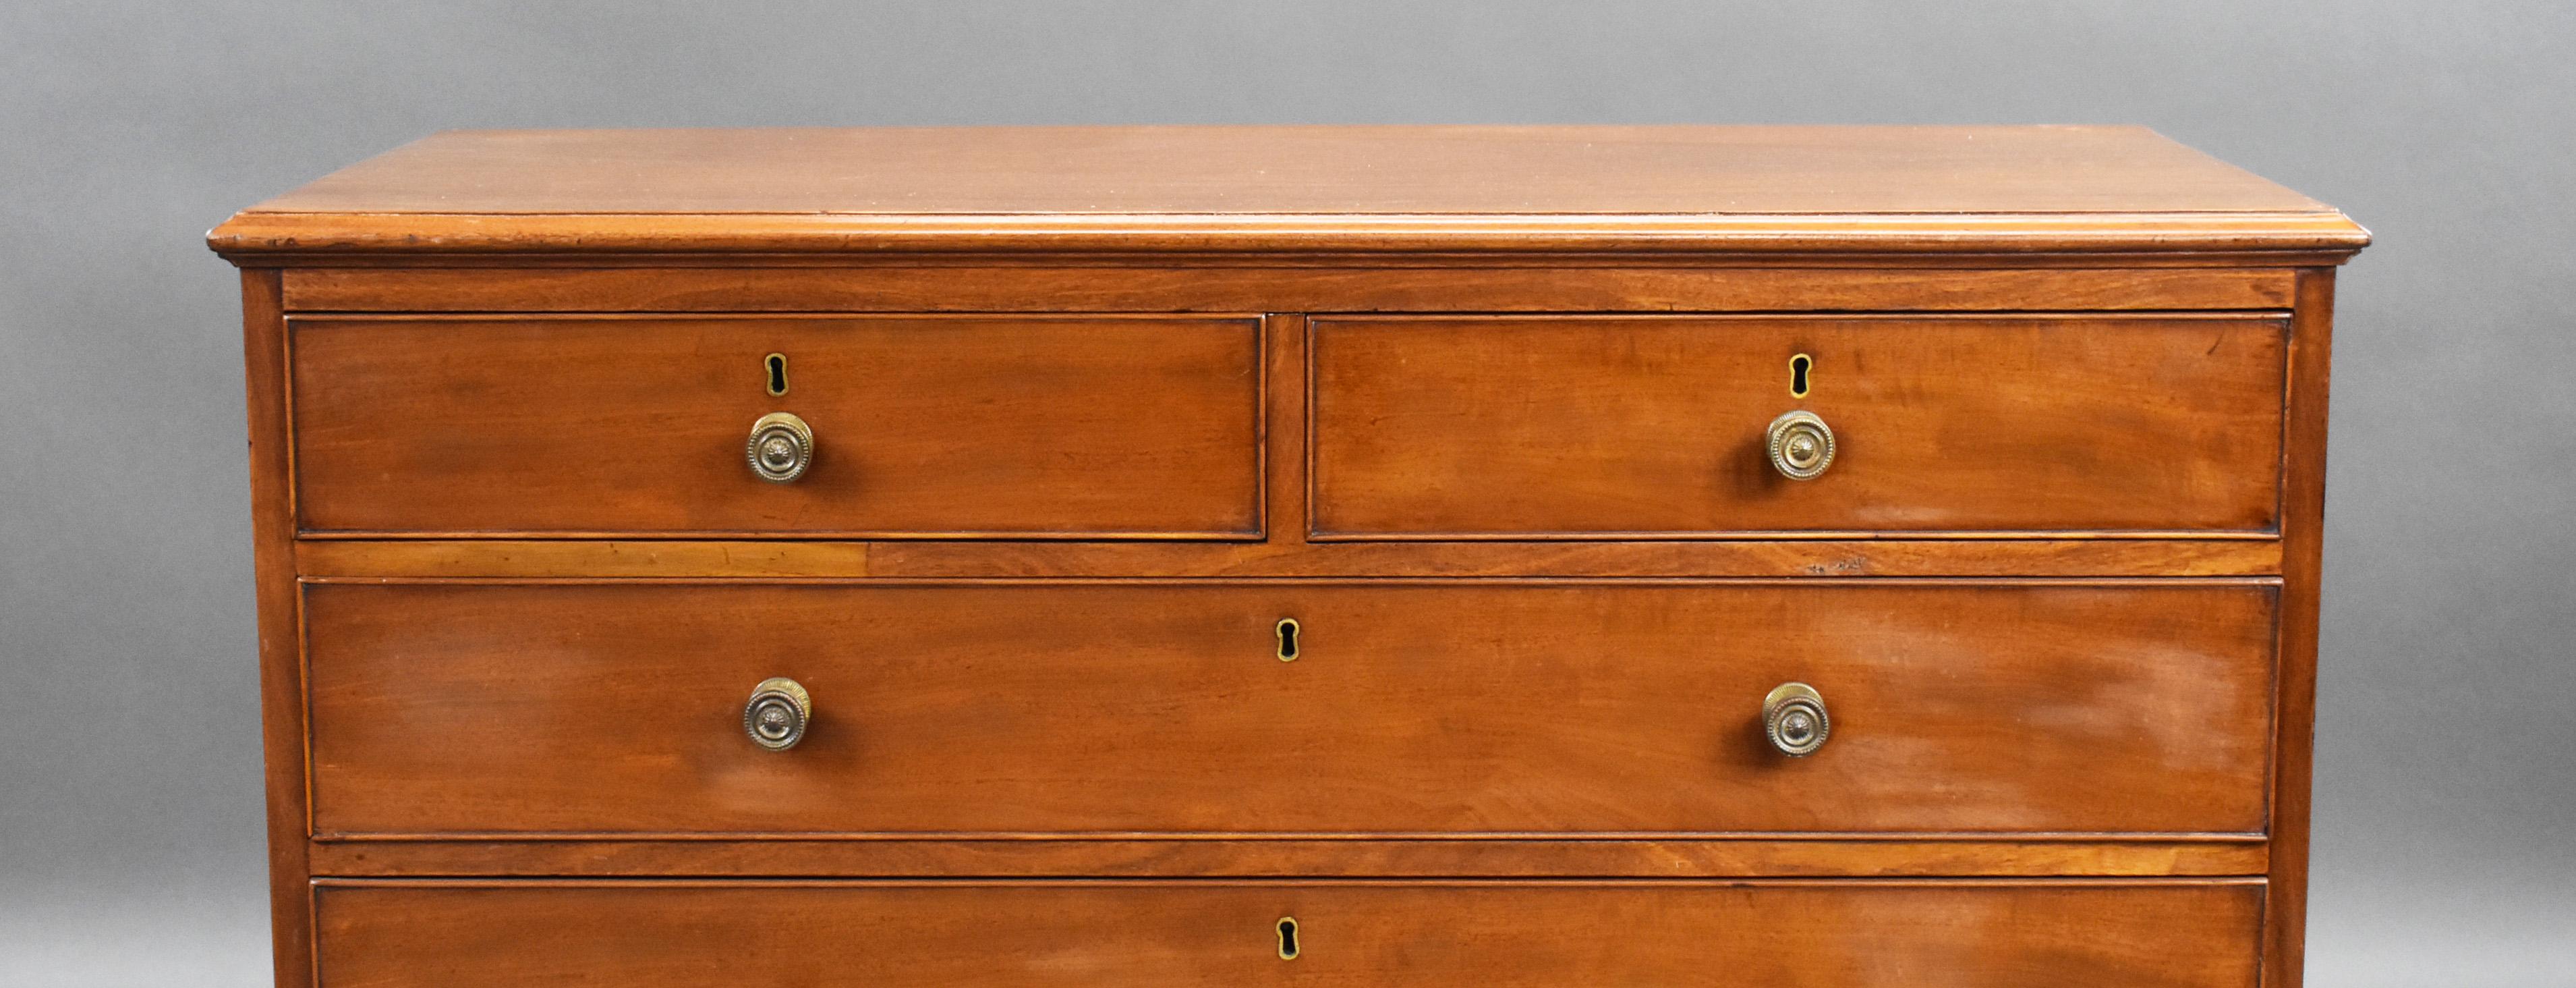 19th Century English George III Mahogany Chest of Drawers For Sale 2